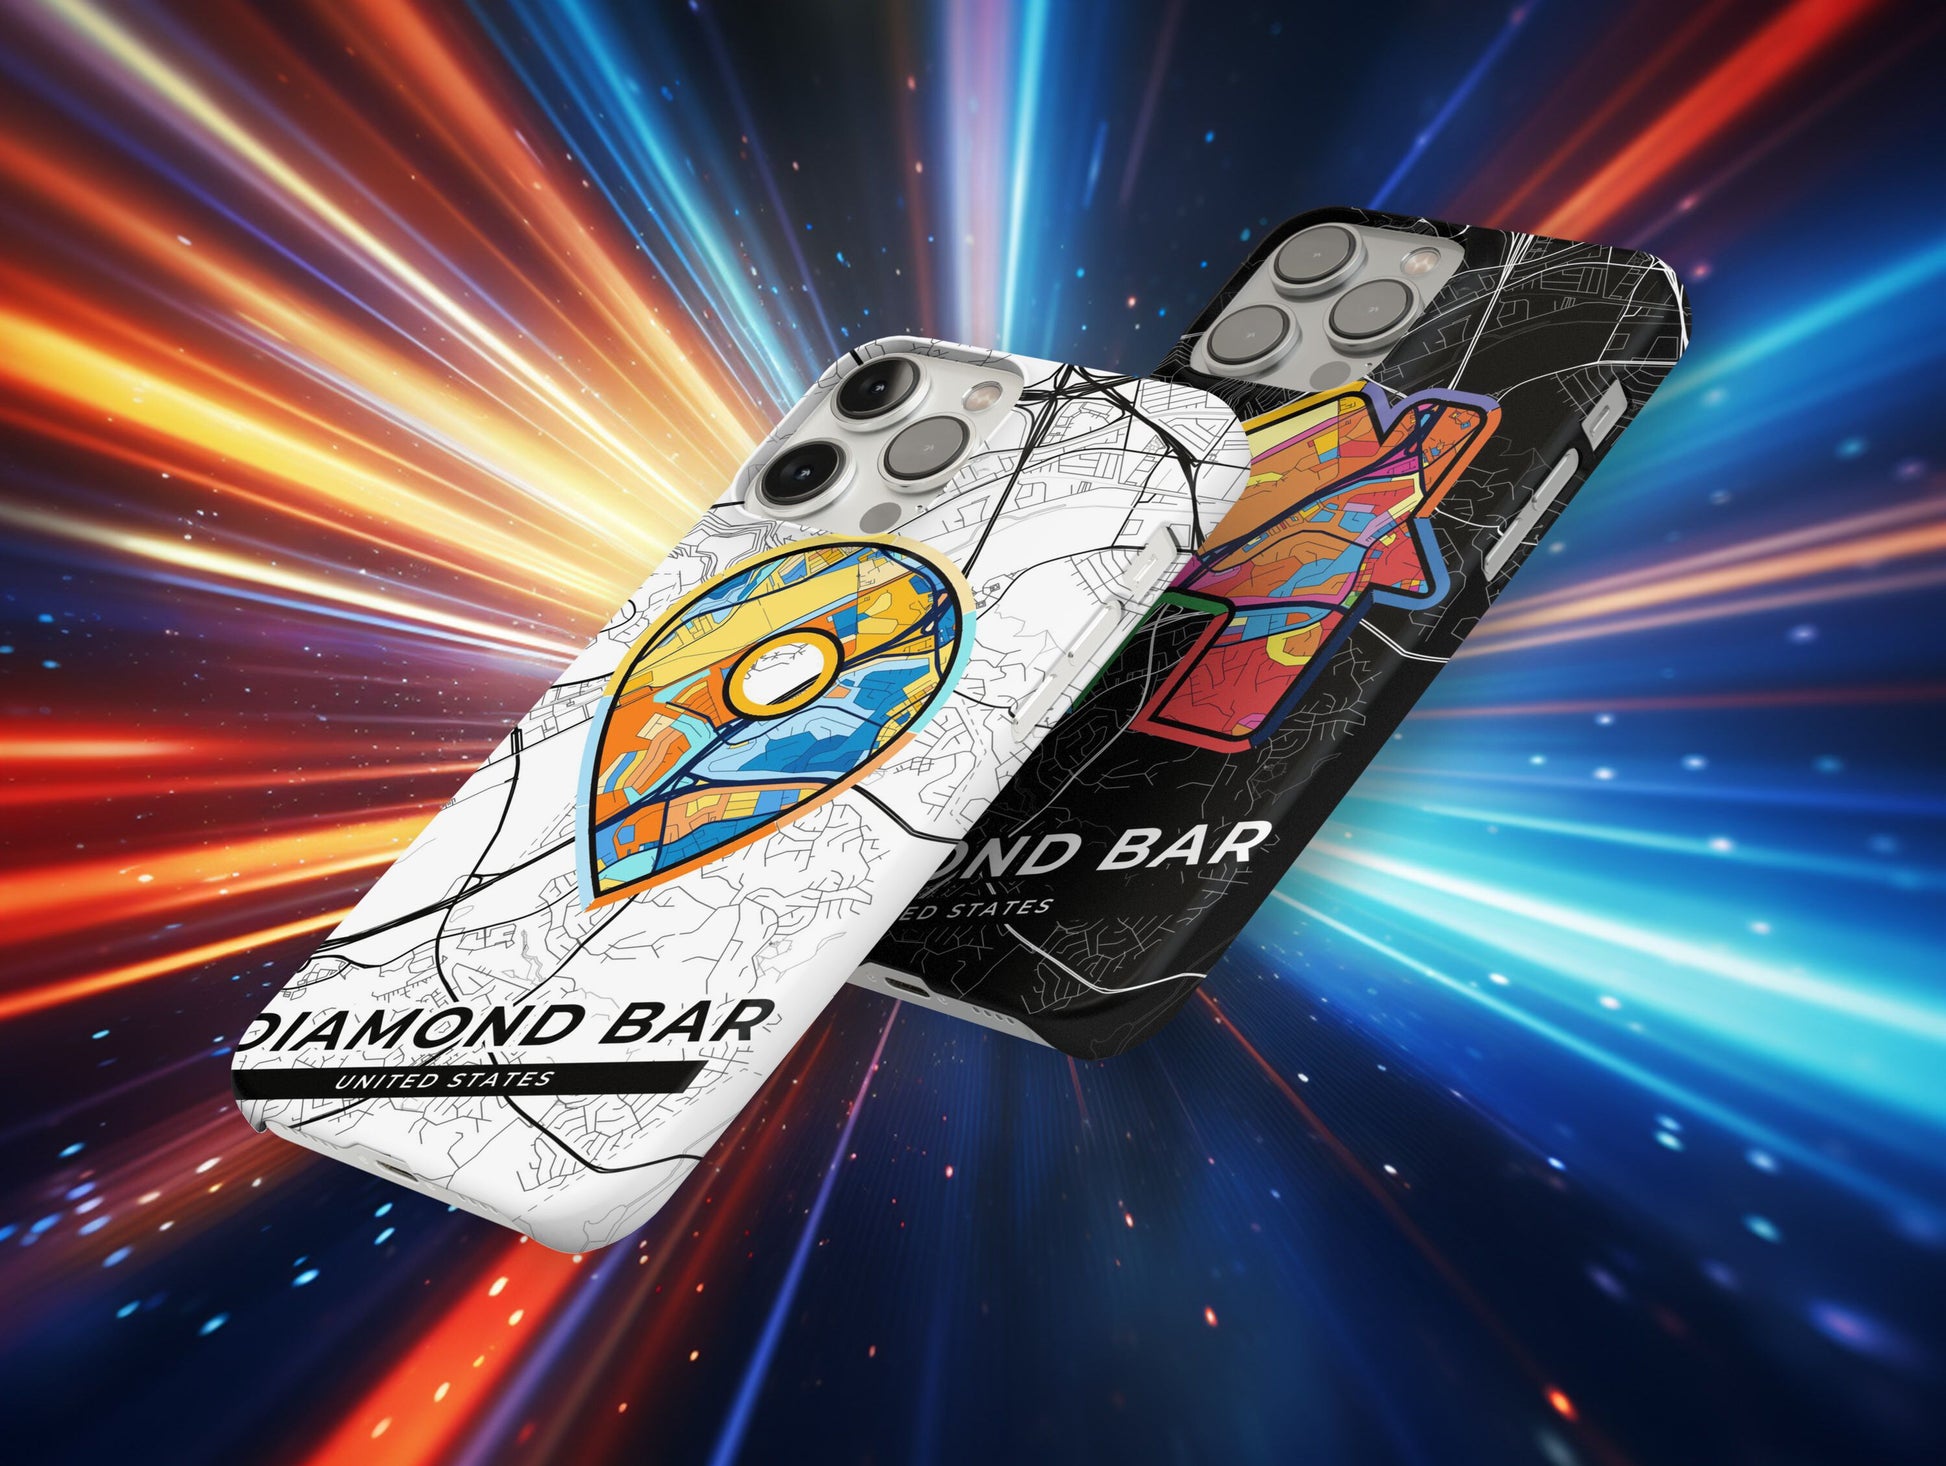 Diamond Bar California slim phone case with colorful icon. Birthday, wedding or housewarming gift. Couple match cases.